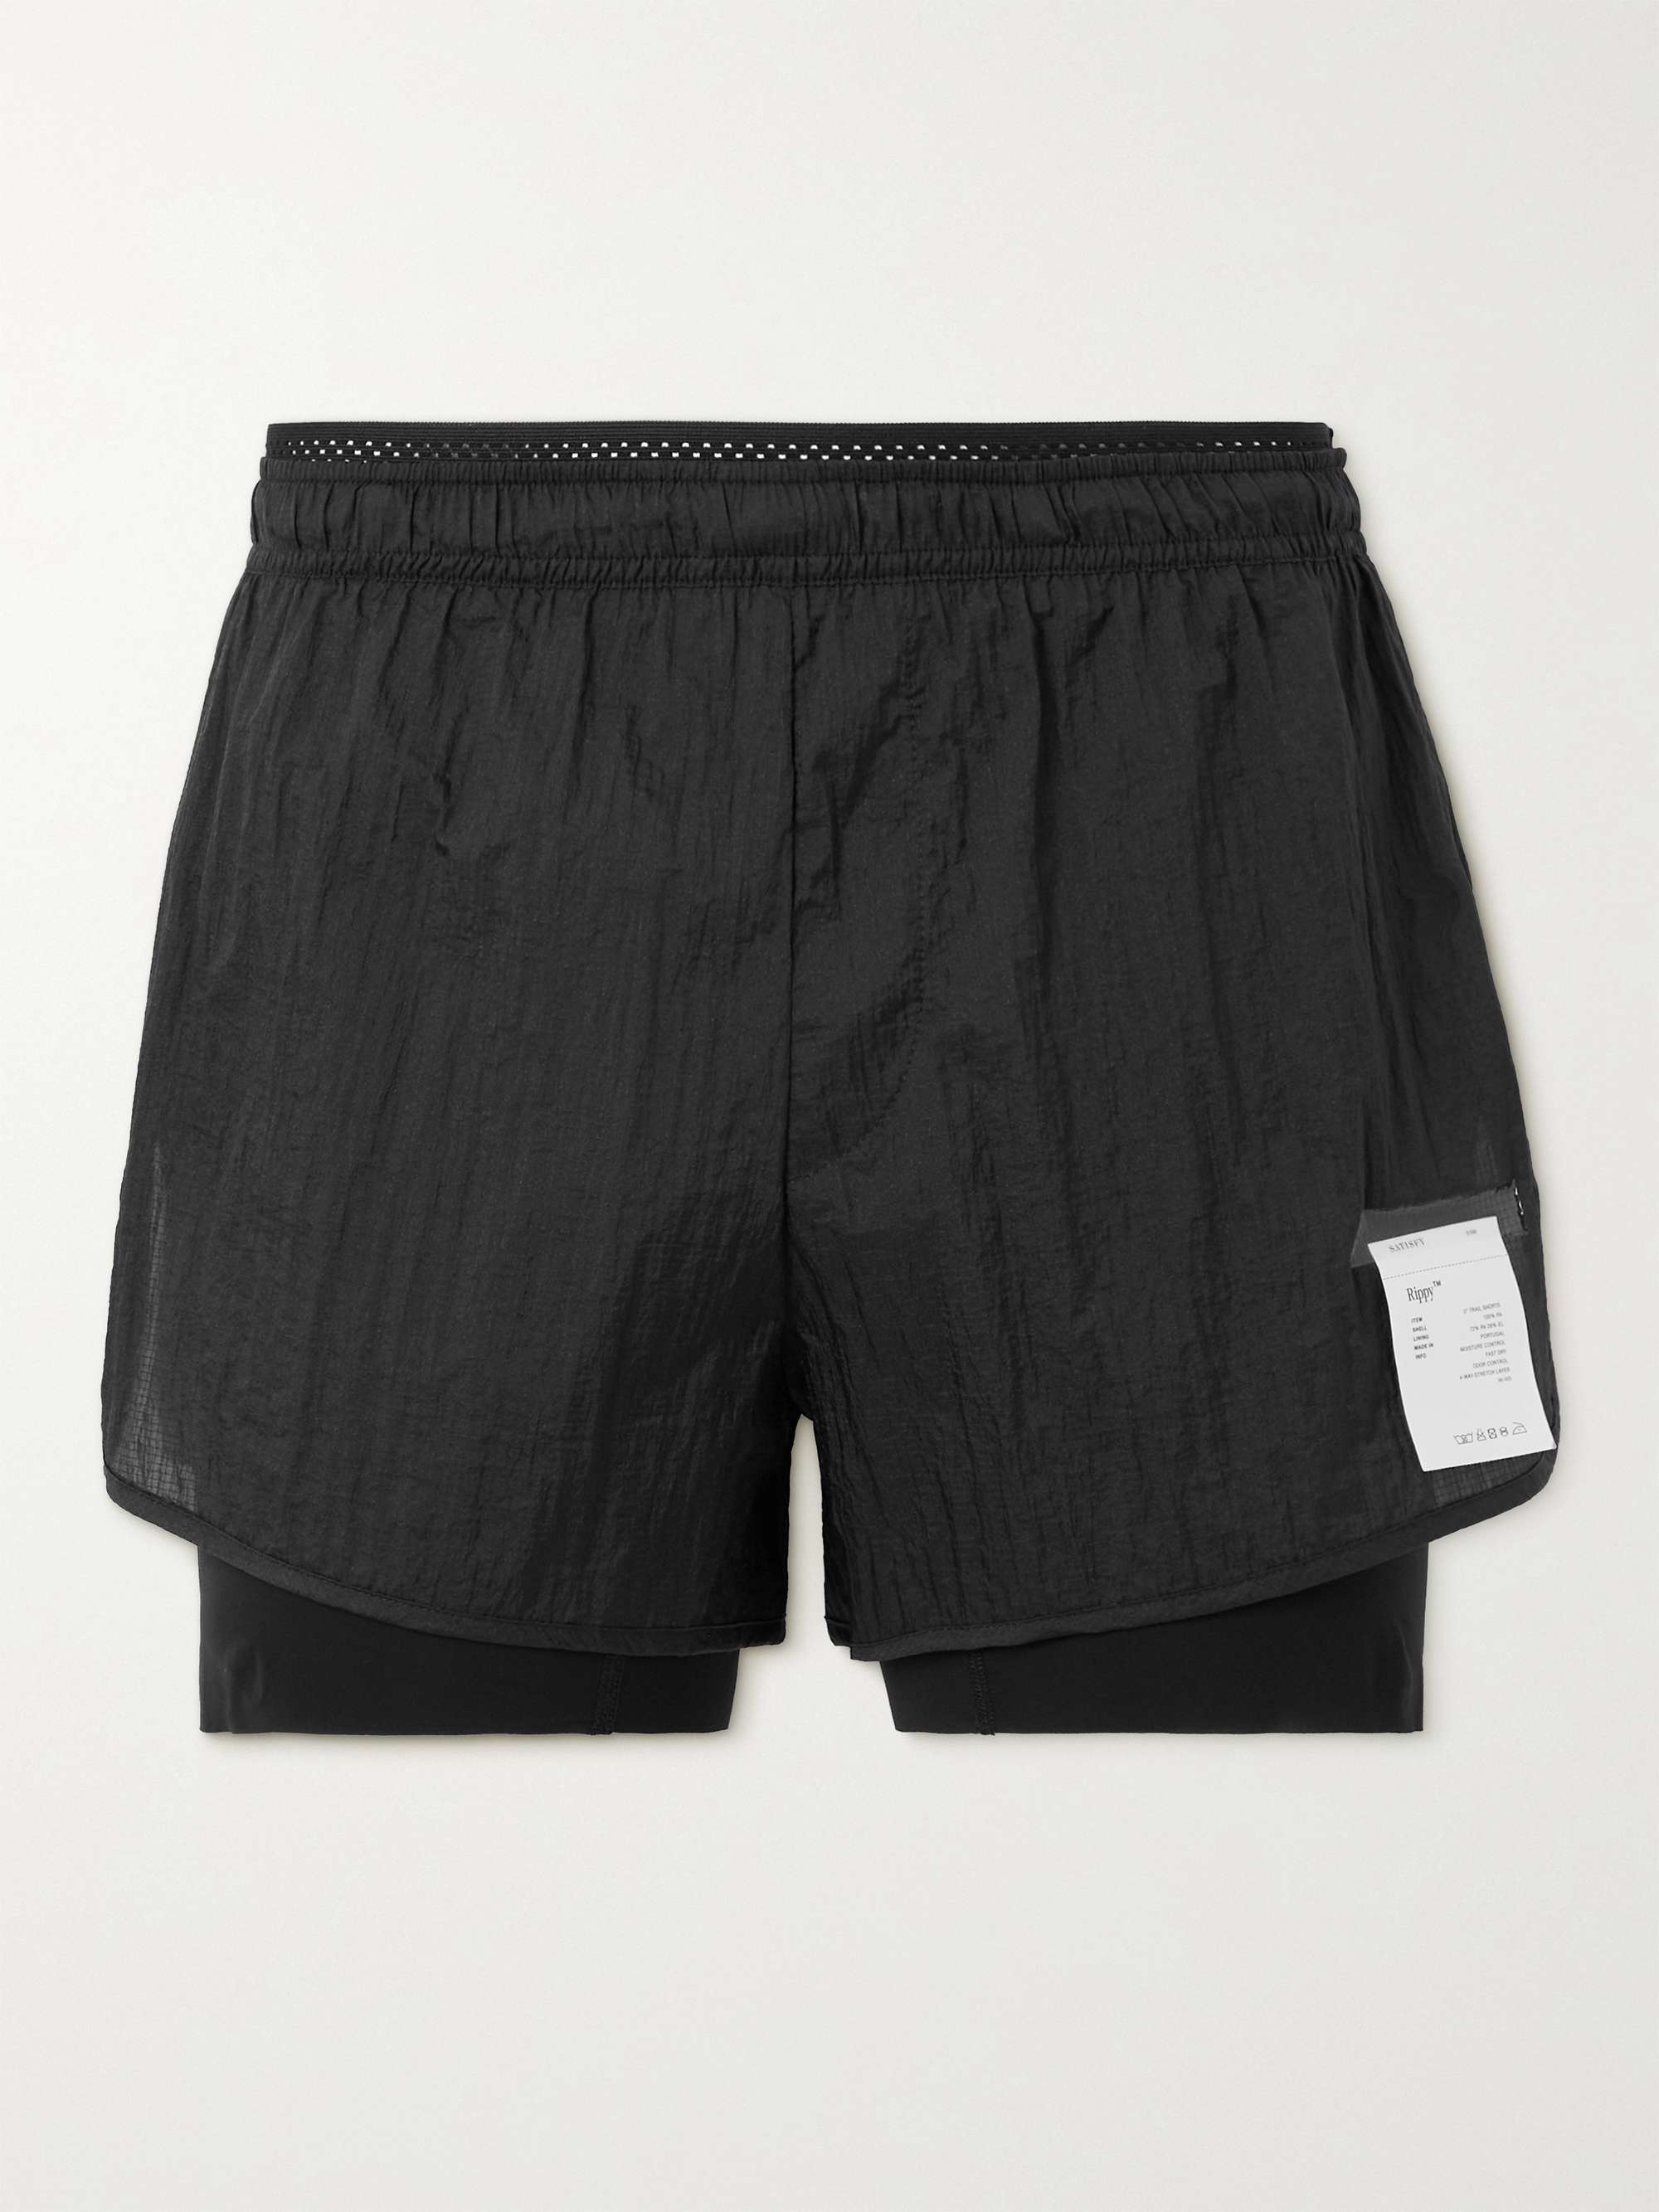 SATISFY Layered Rippy and Justice Shorts